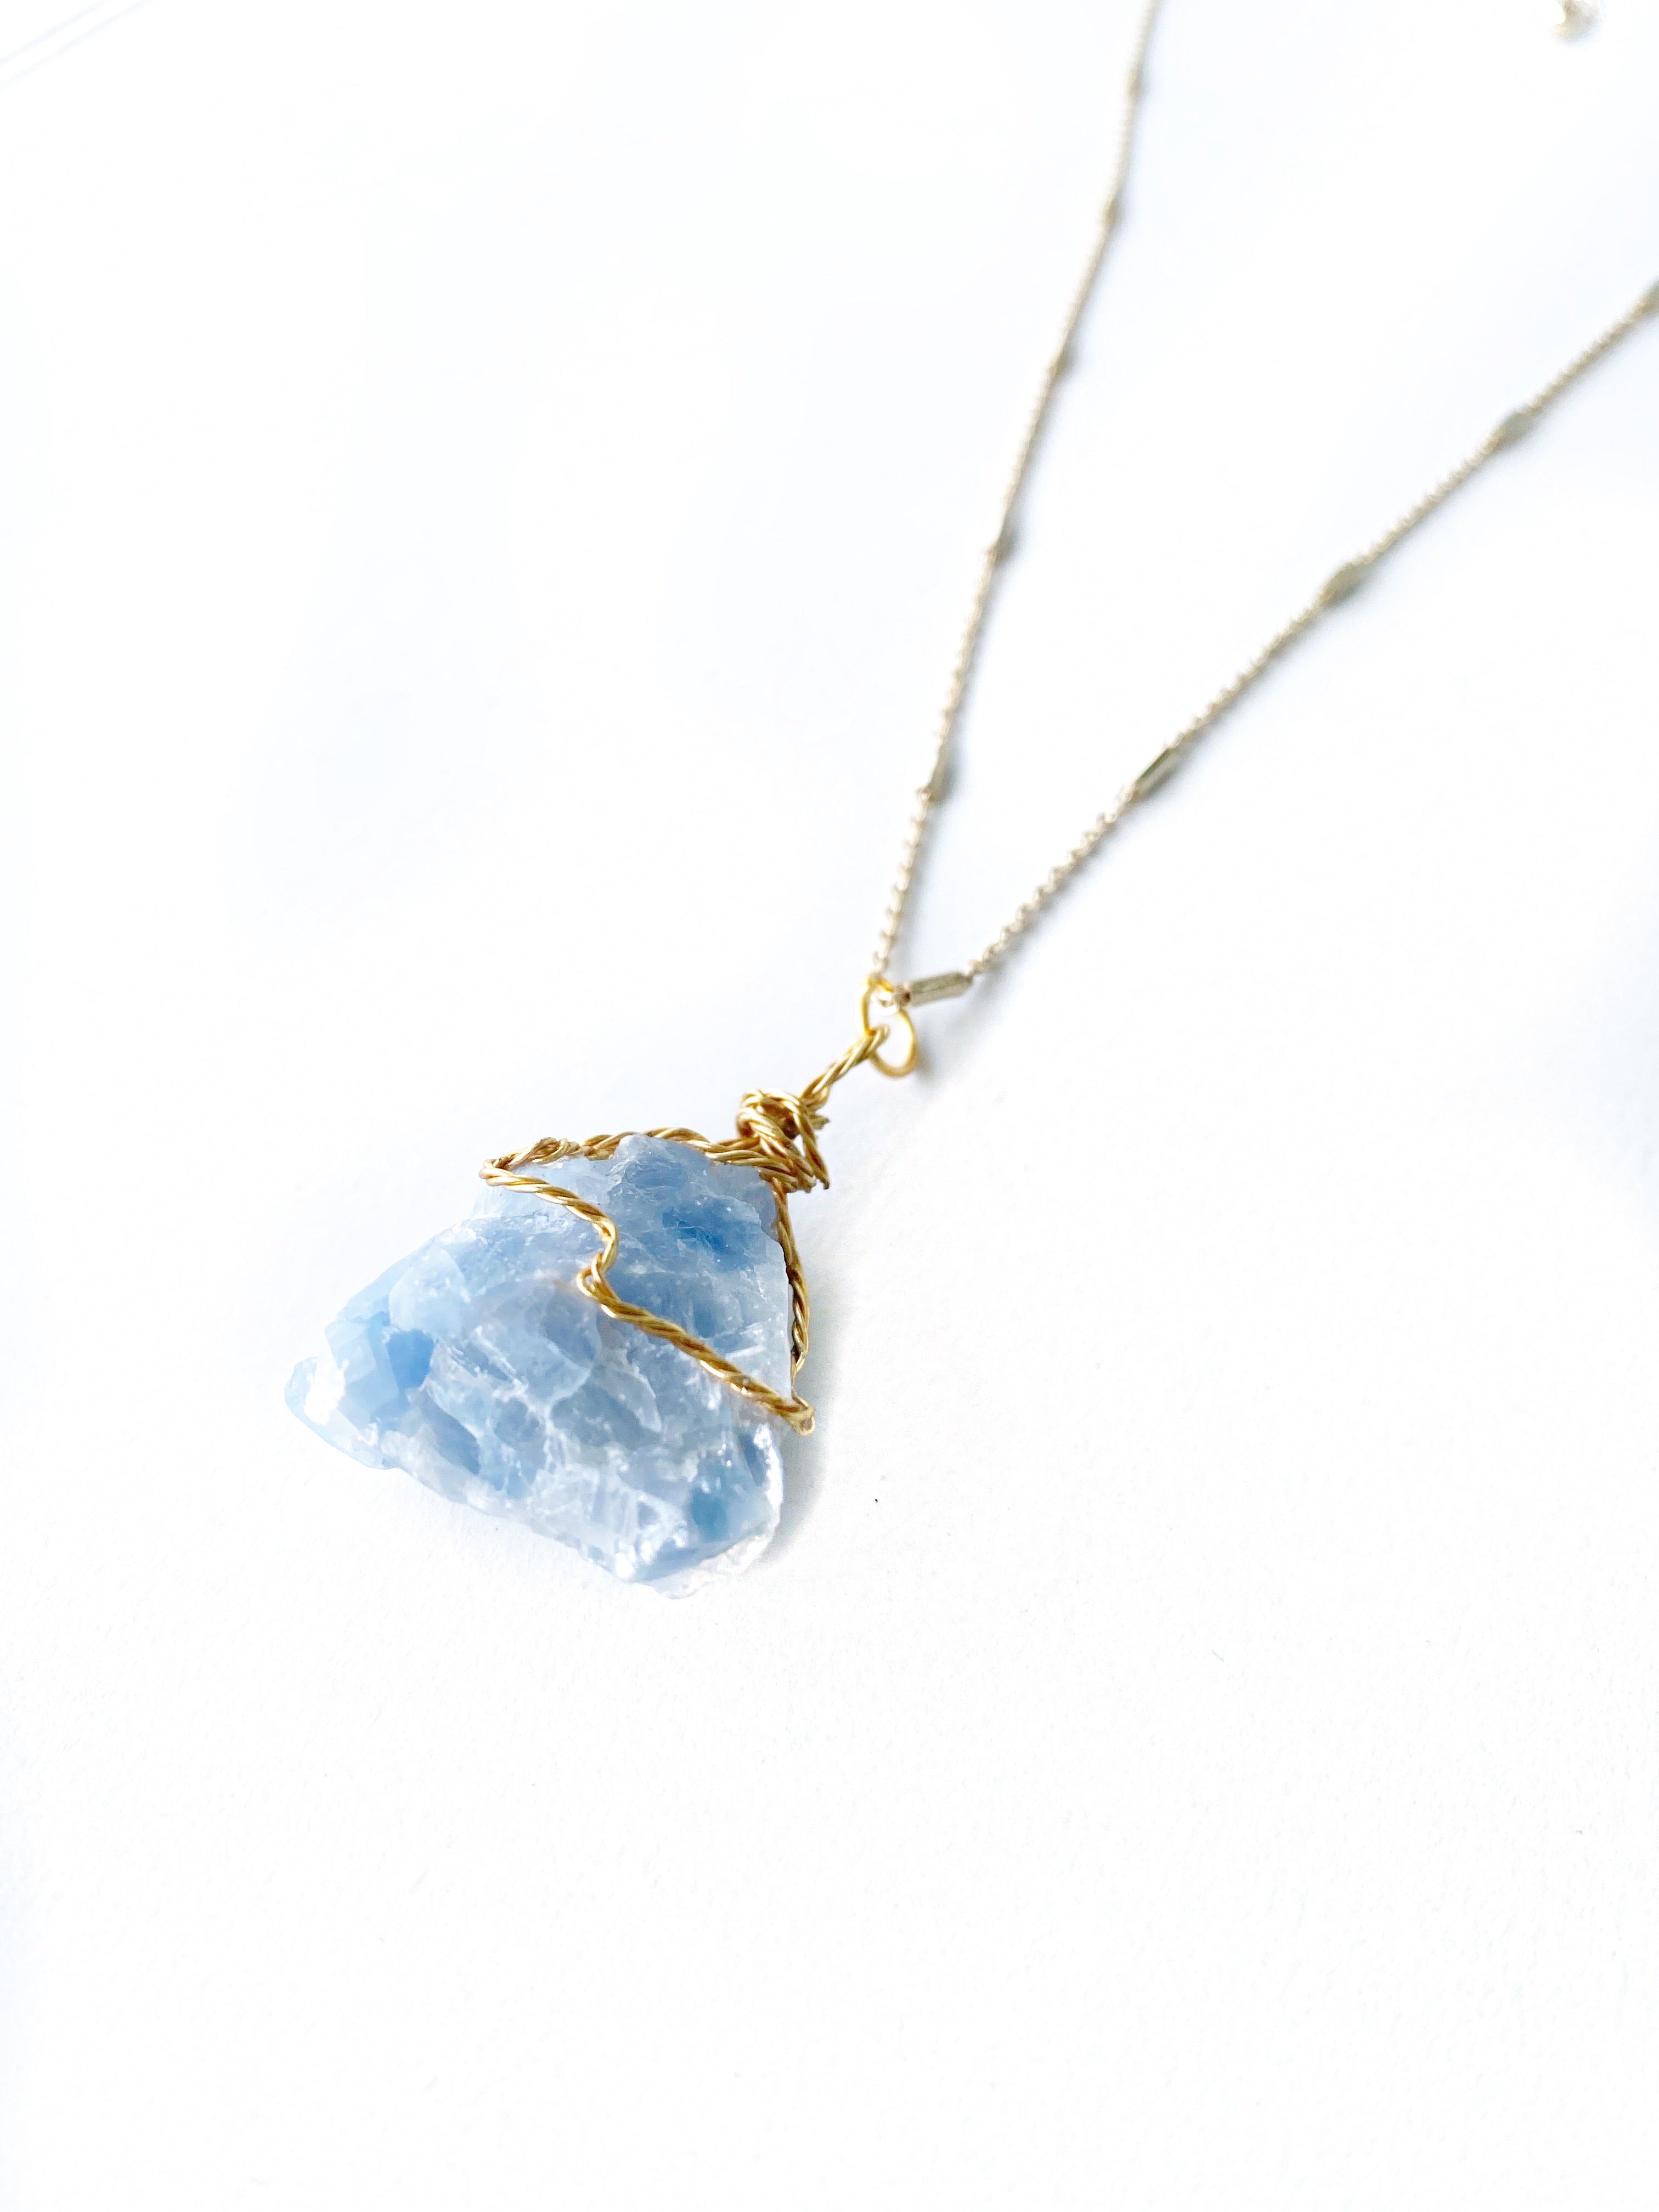 Rough Blue Calcite Gemstone Crystal Gold Necklace